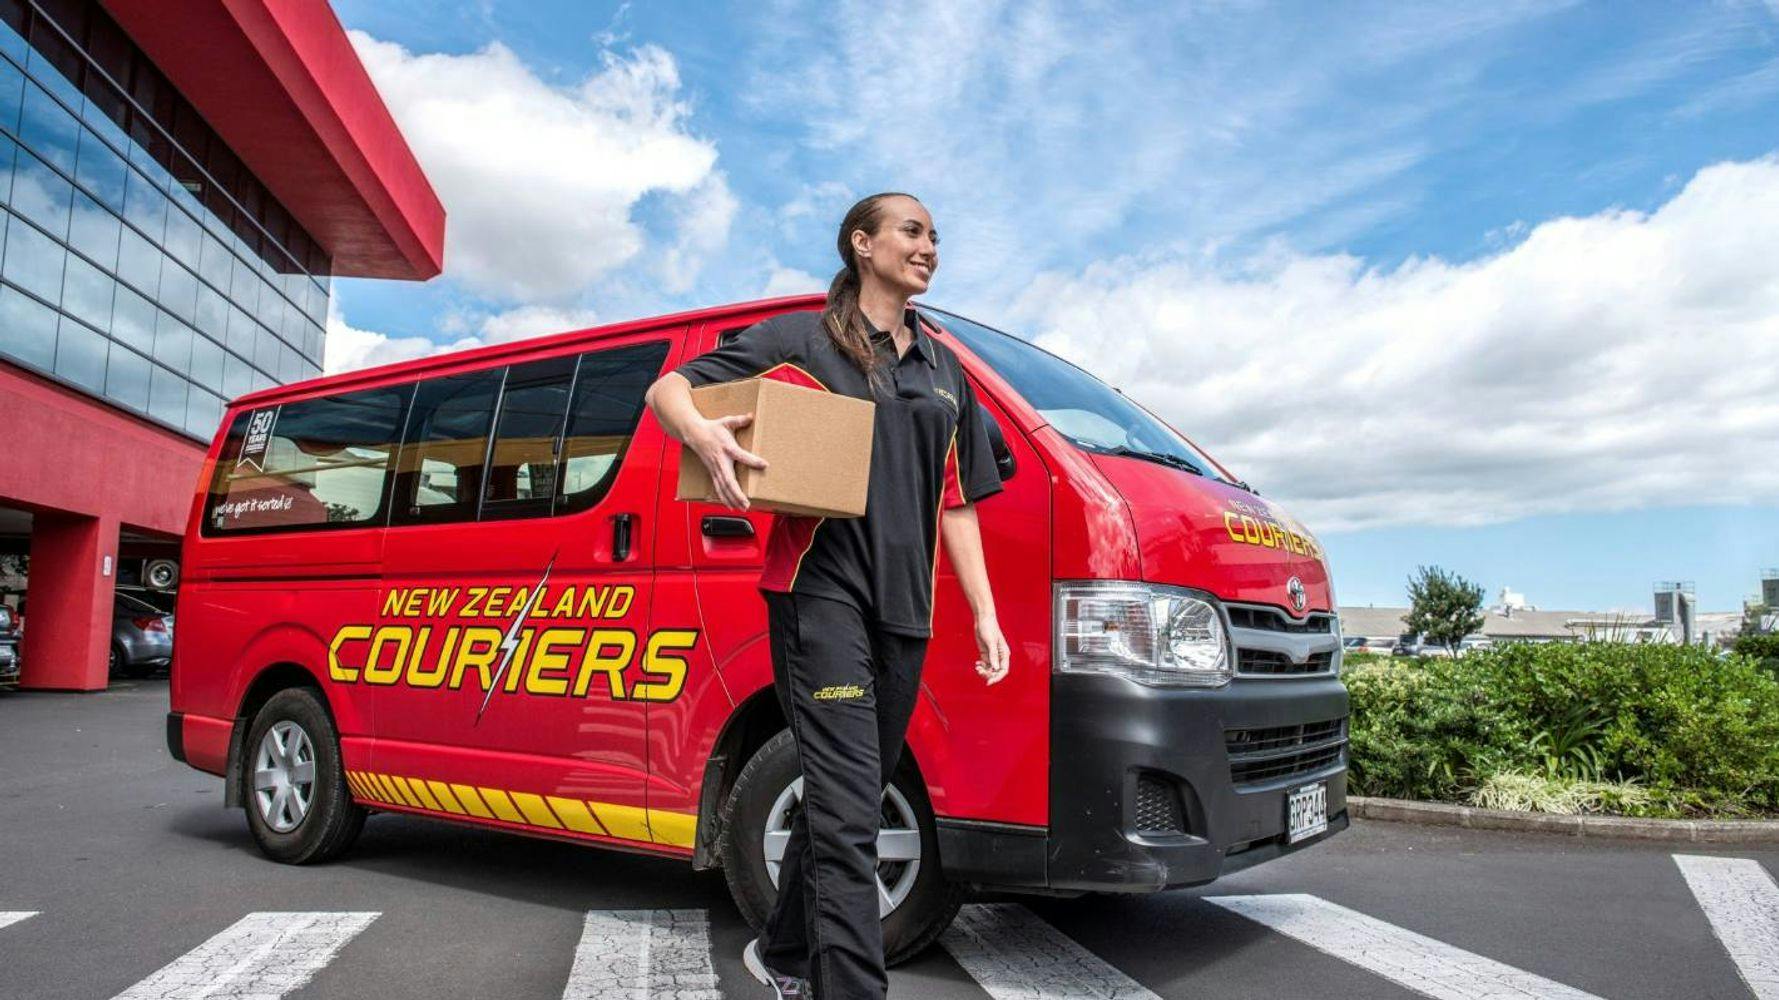 Women holding package in front of NZ Couriers Van